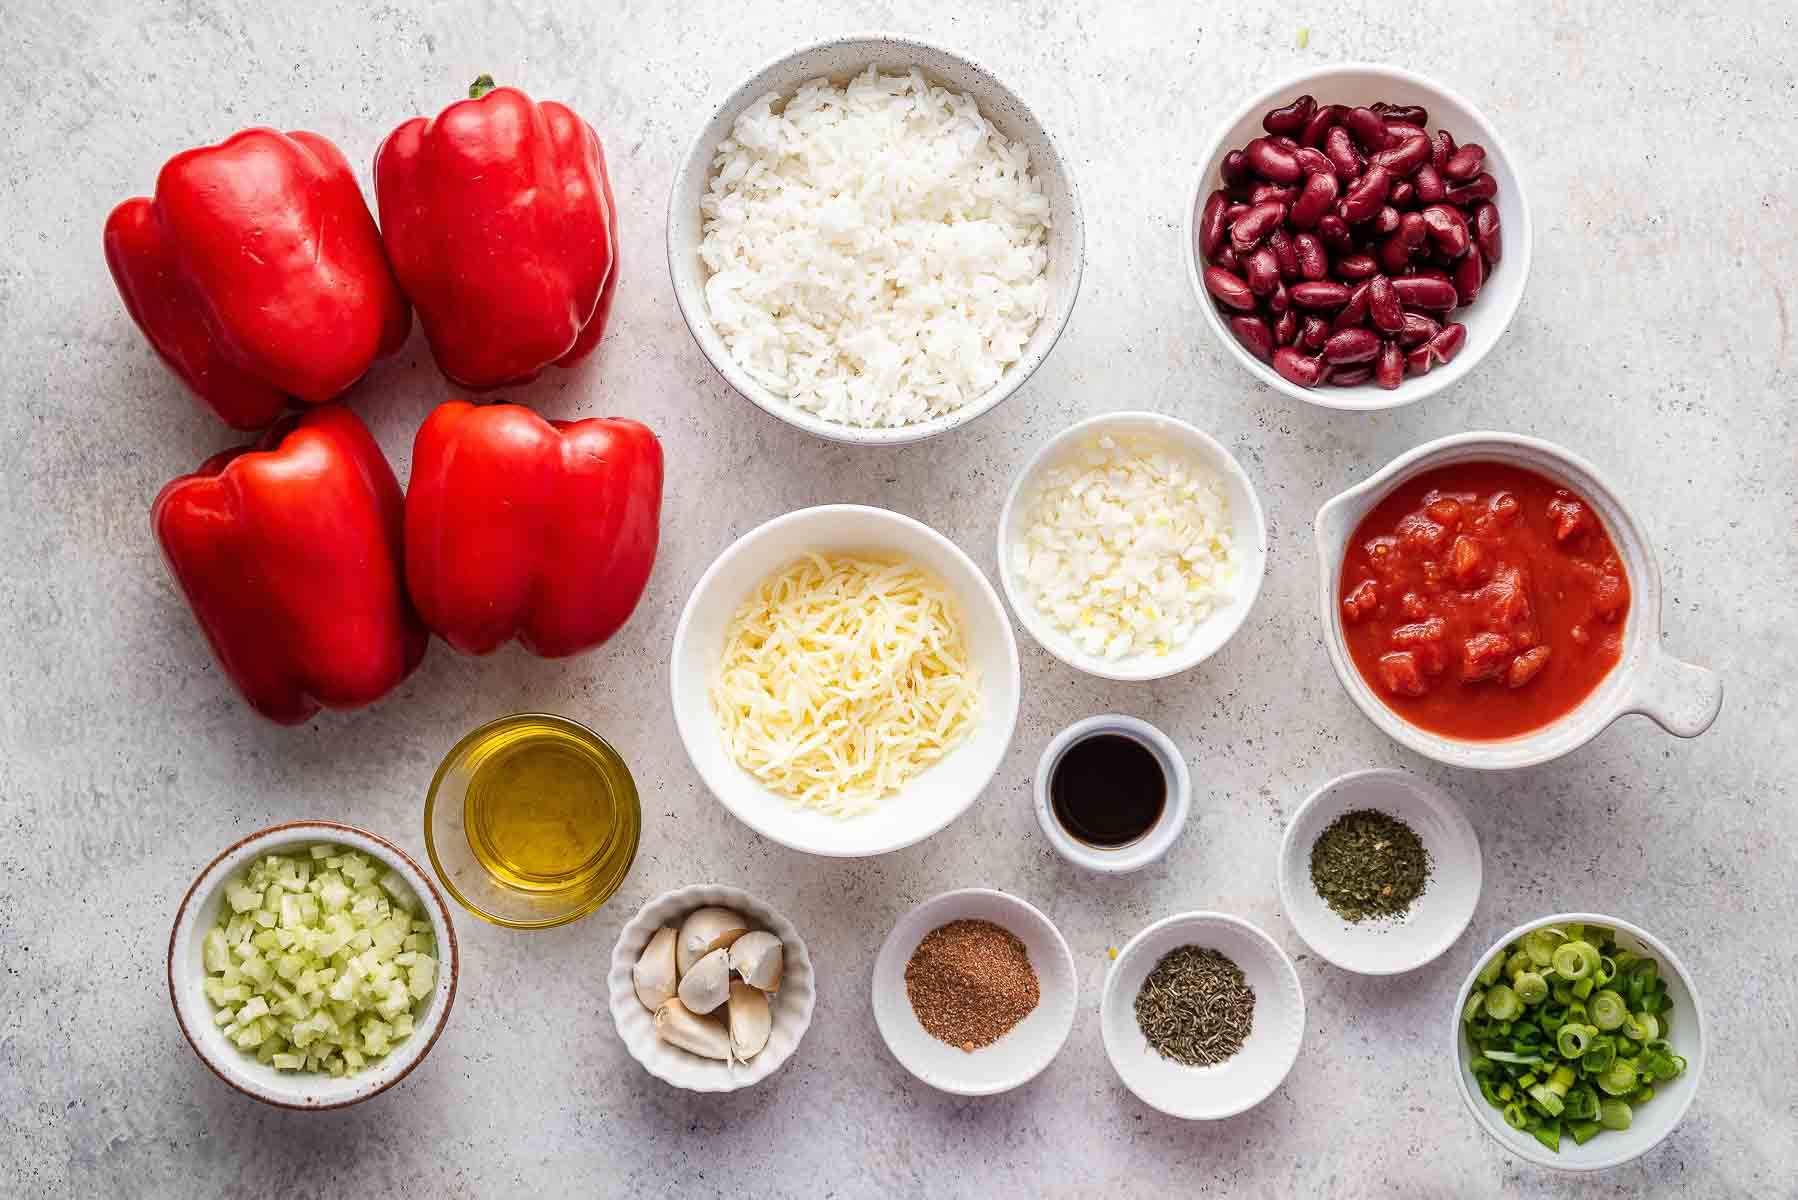 Ingredients to make rice and bean stuffed peppers.